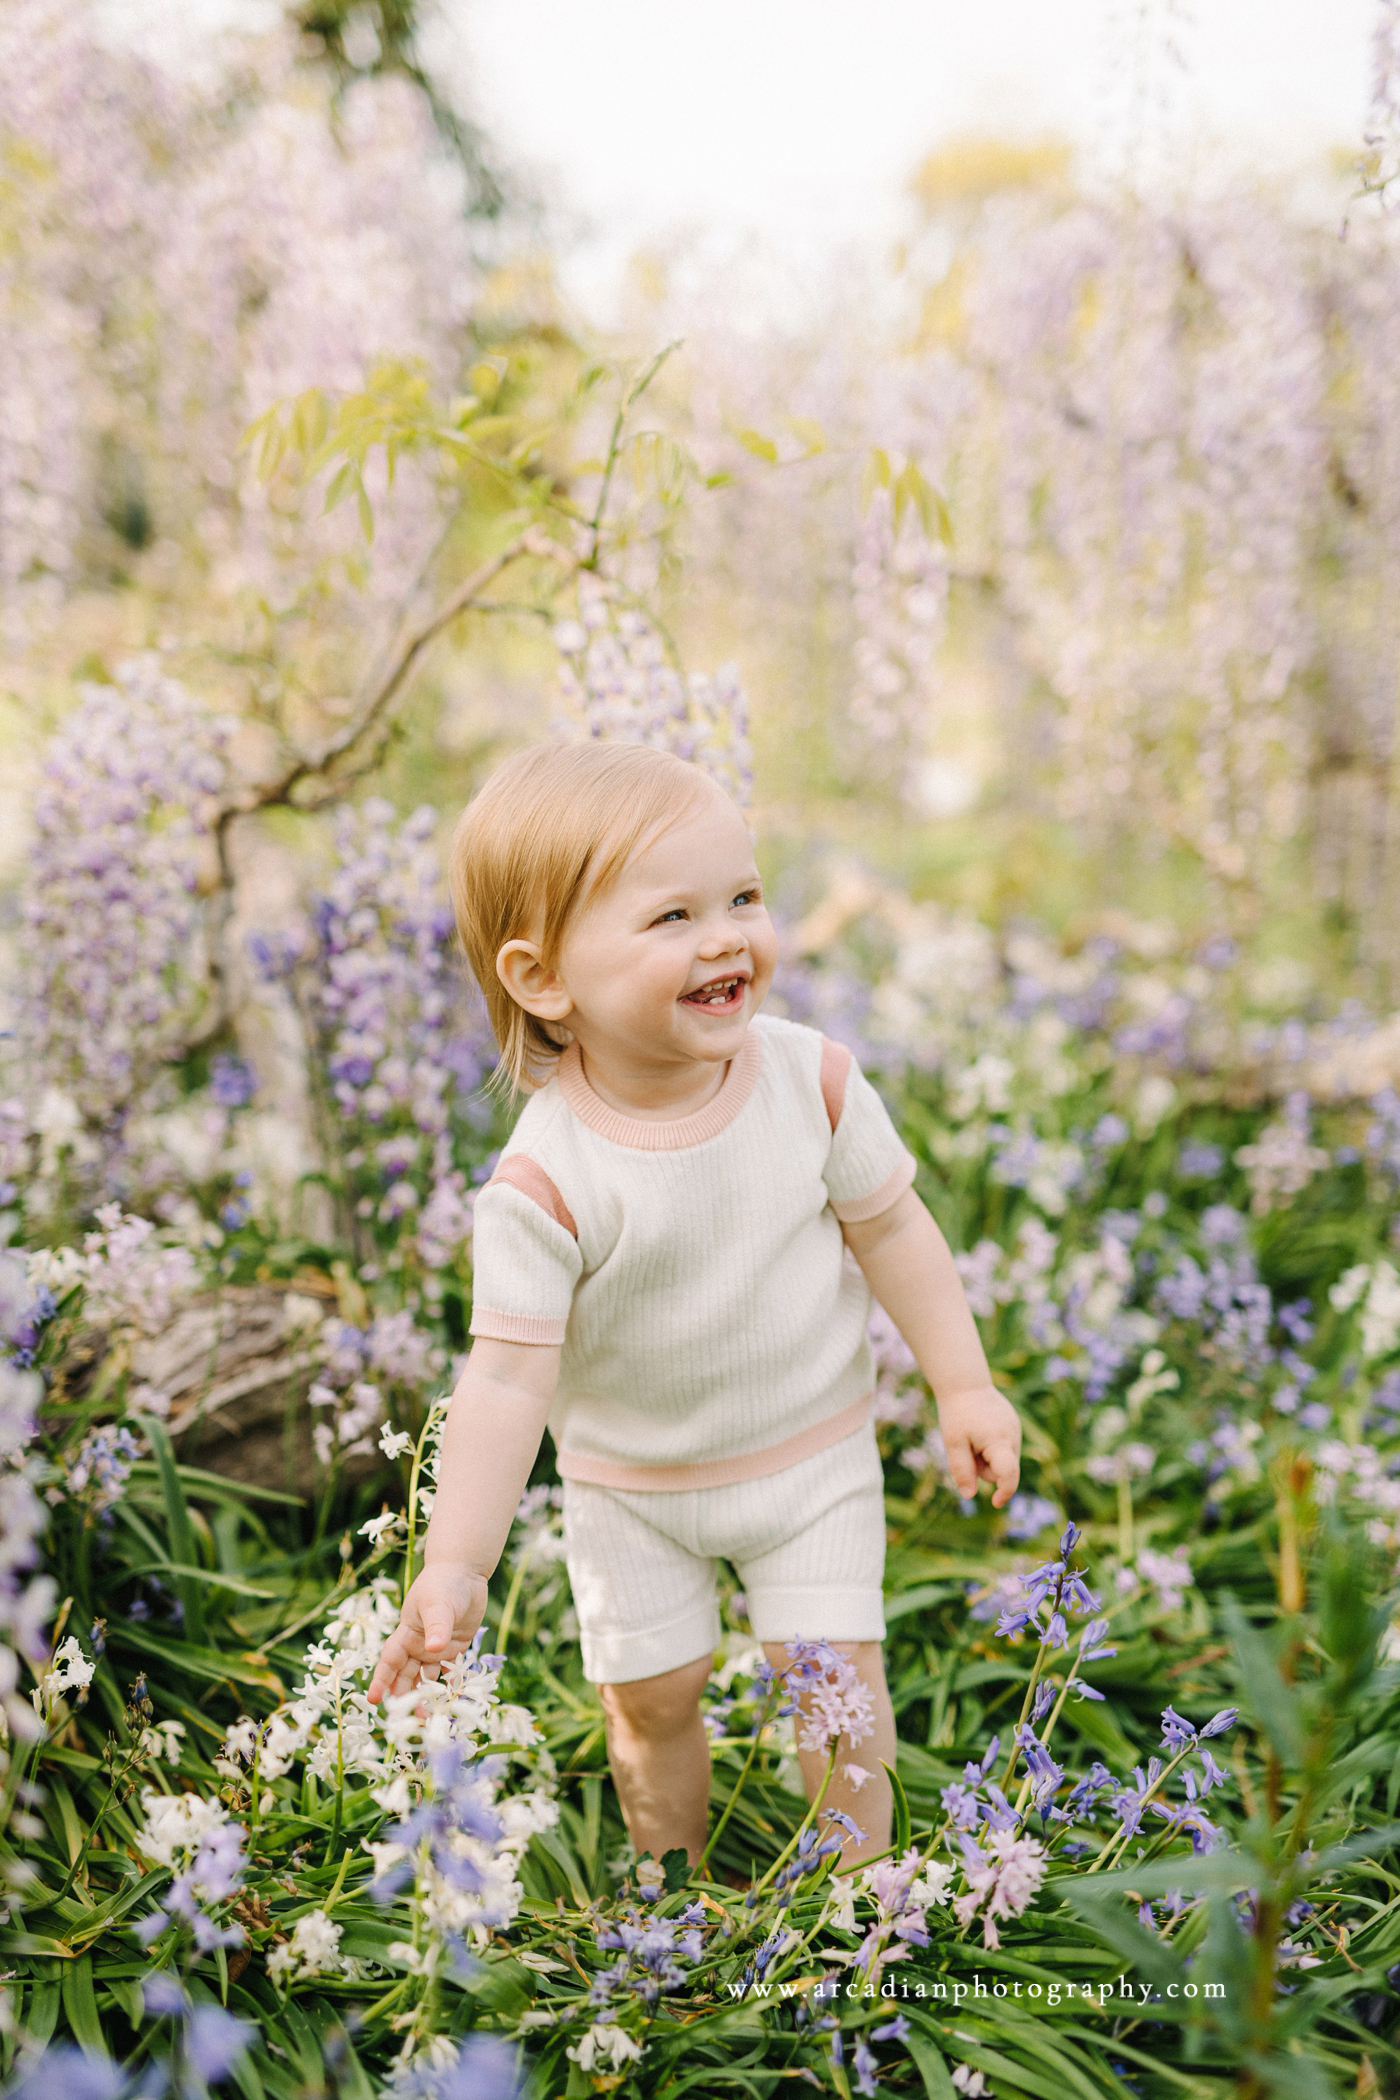 Outdoor spring baby photos at the wisteria in Bush Park